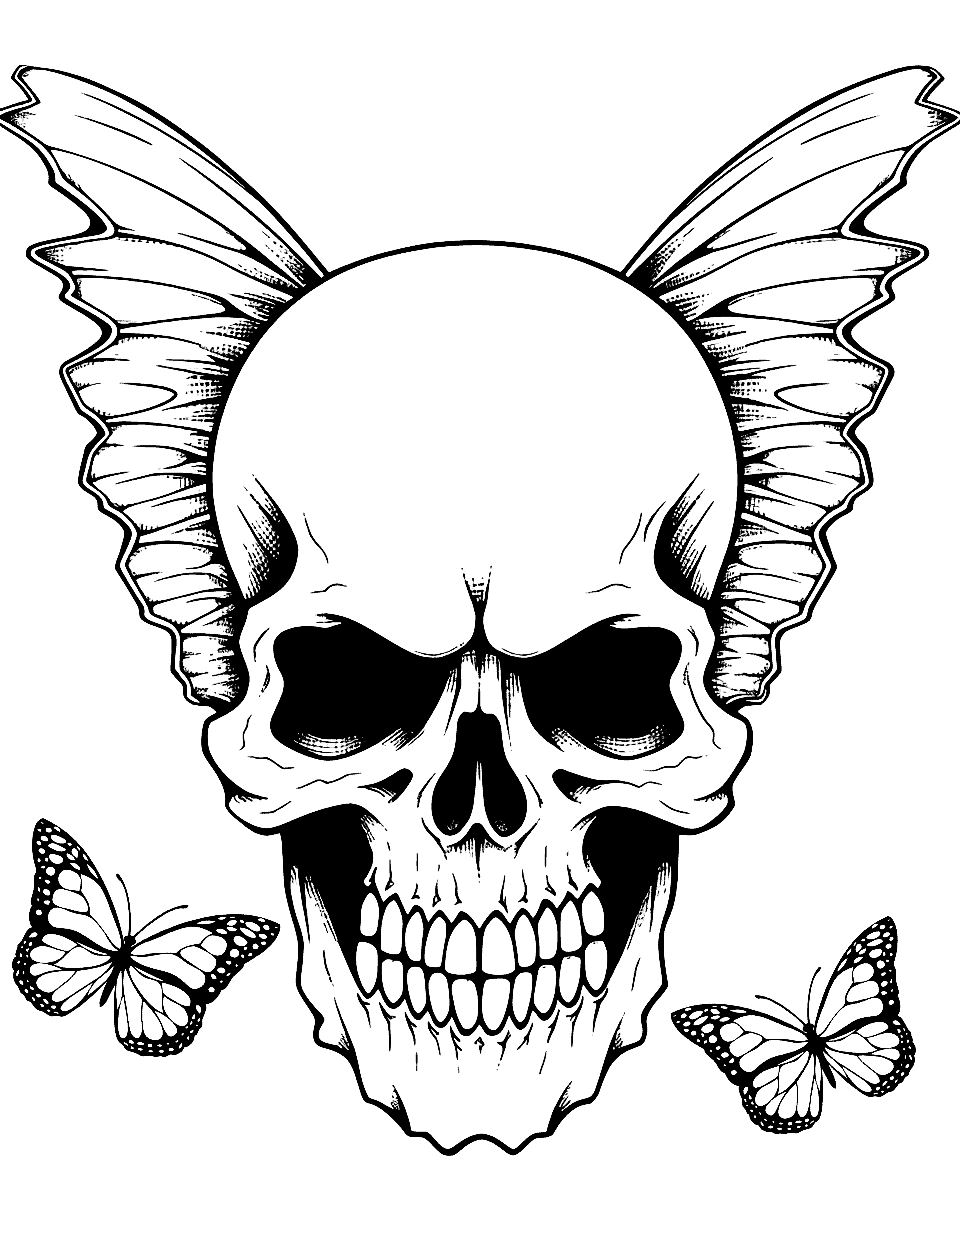 Skull with Butterfly Wings Coloring Page - A skull with delicate butterfly wings attached to the sides.